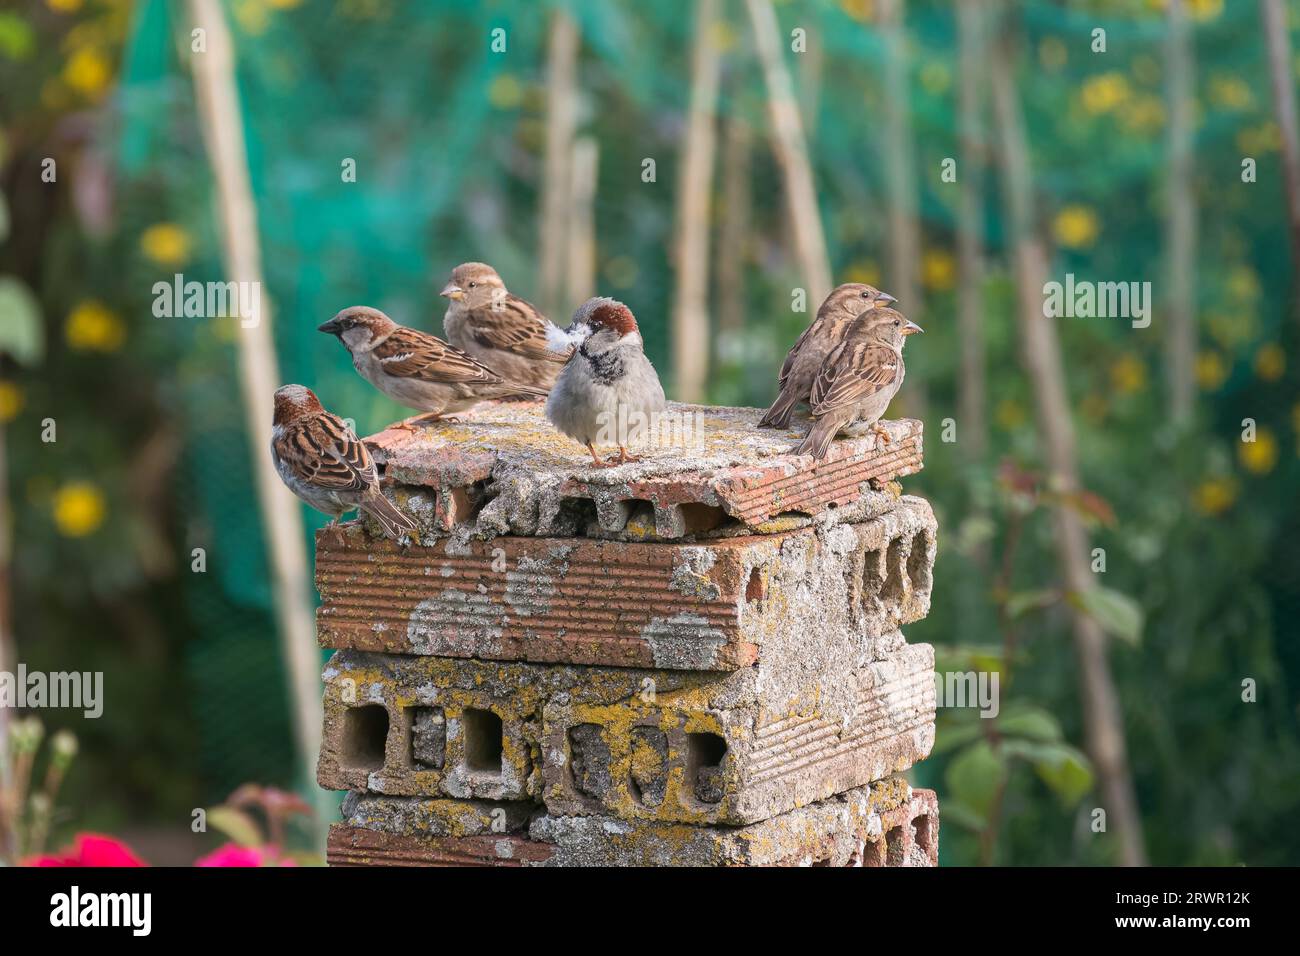 Sparrows perched on a column in the garden in summer with sunlight outdoors Stock Photo